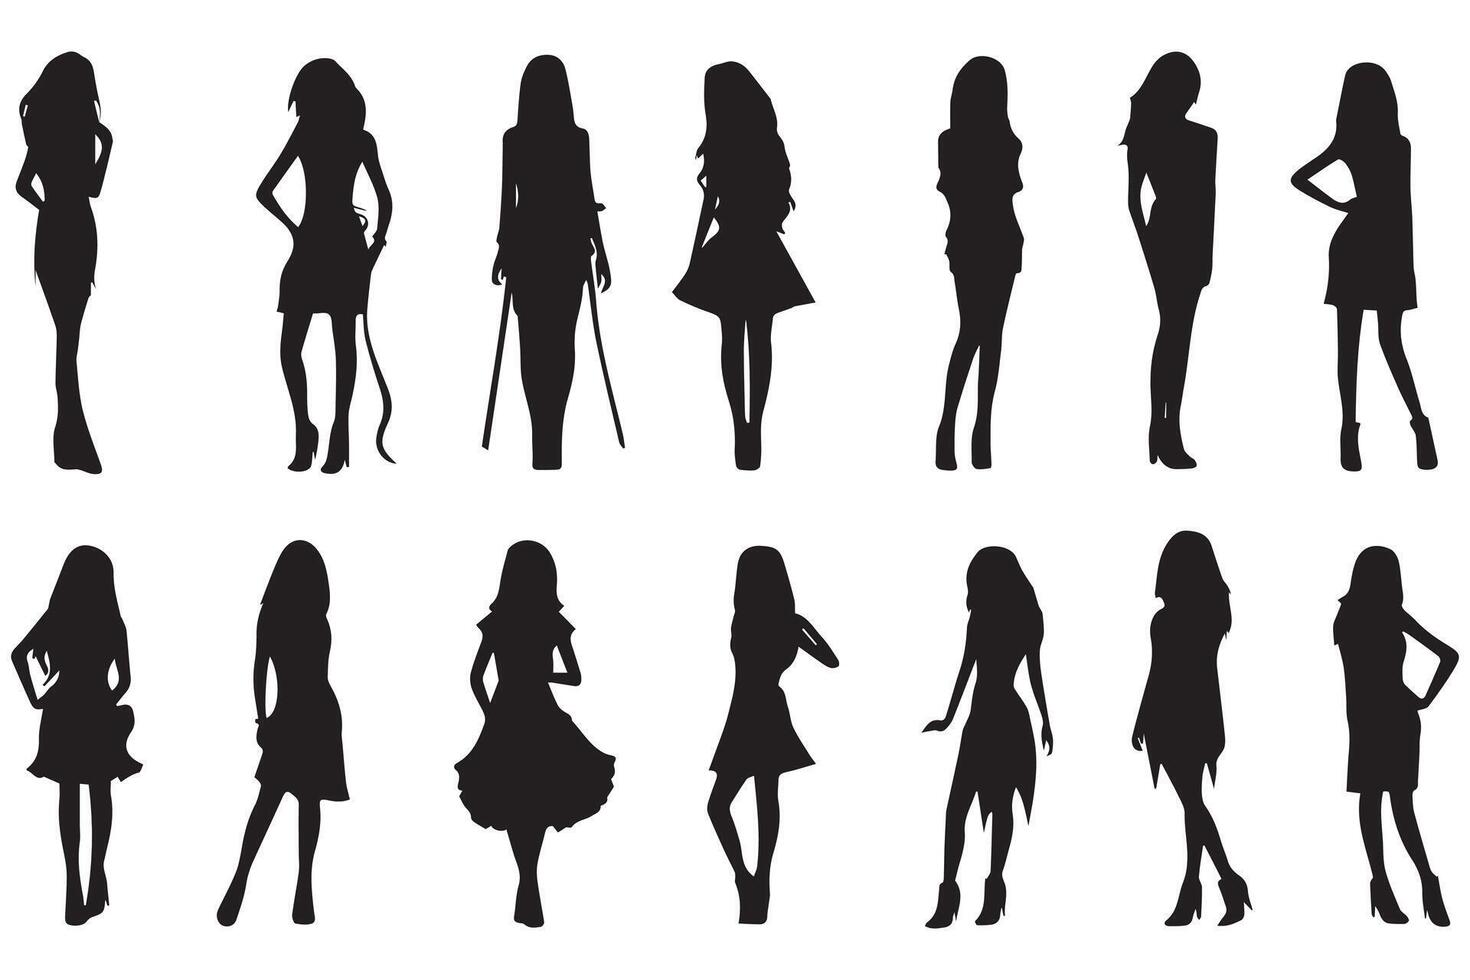 Set of black silhouettes of girls isolated on white background free design vector